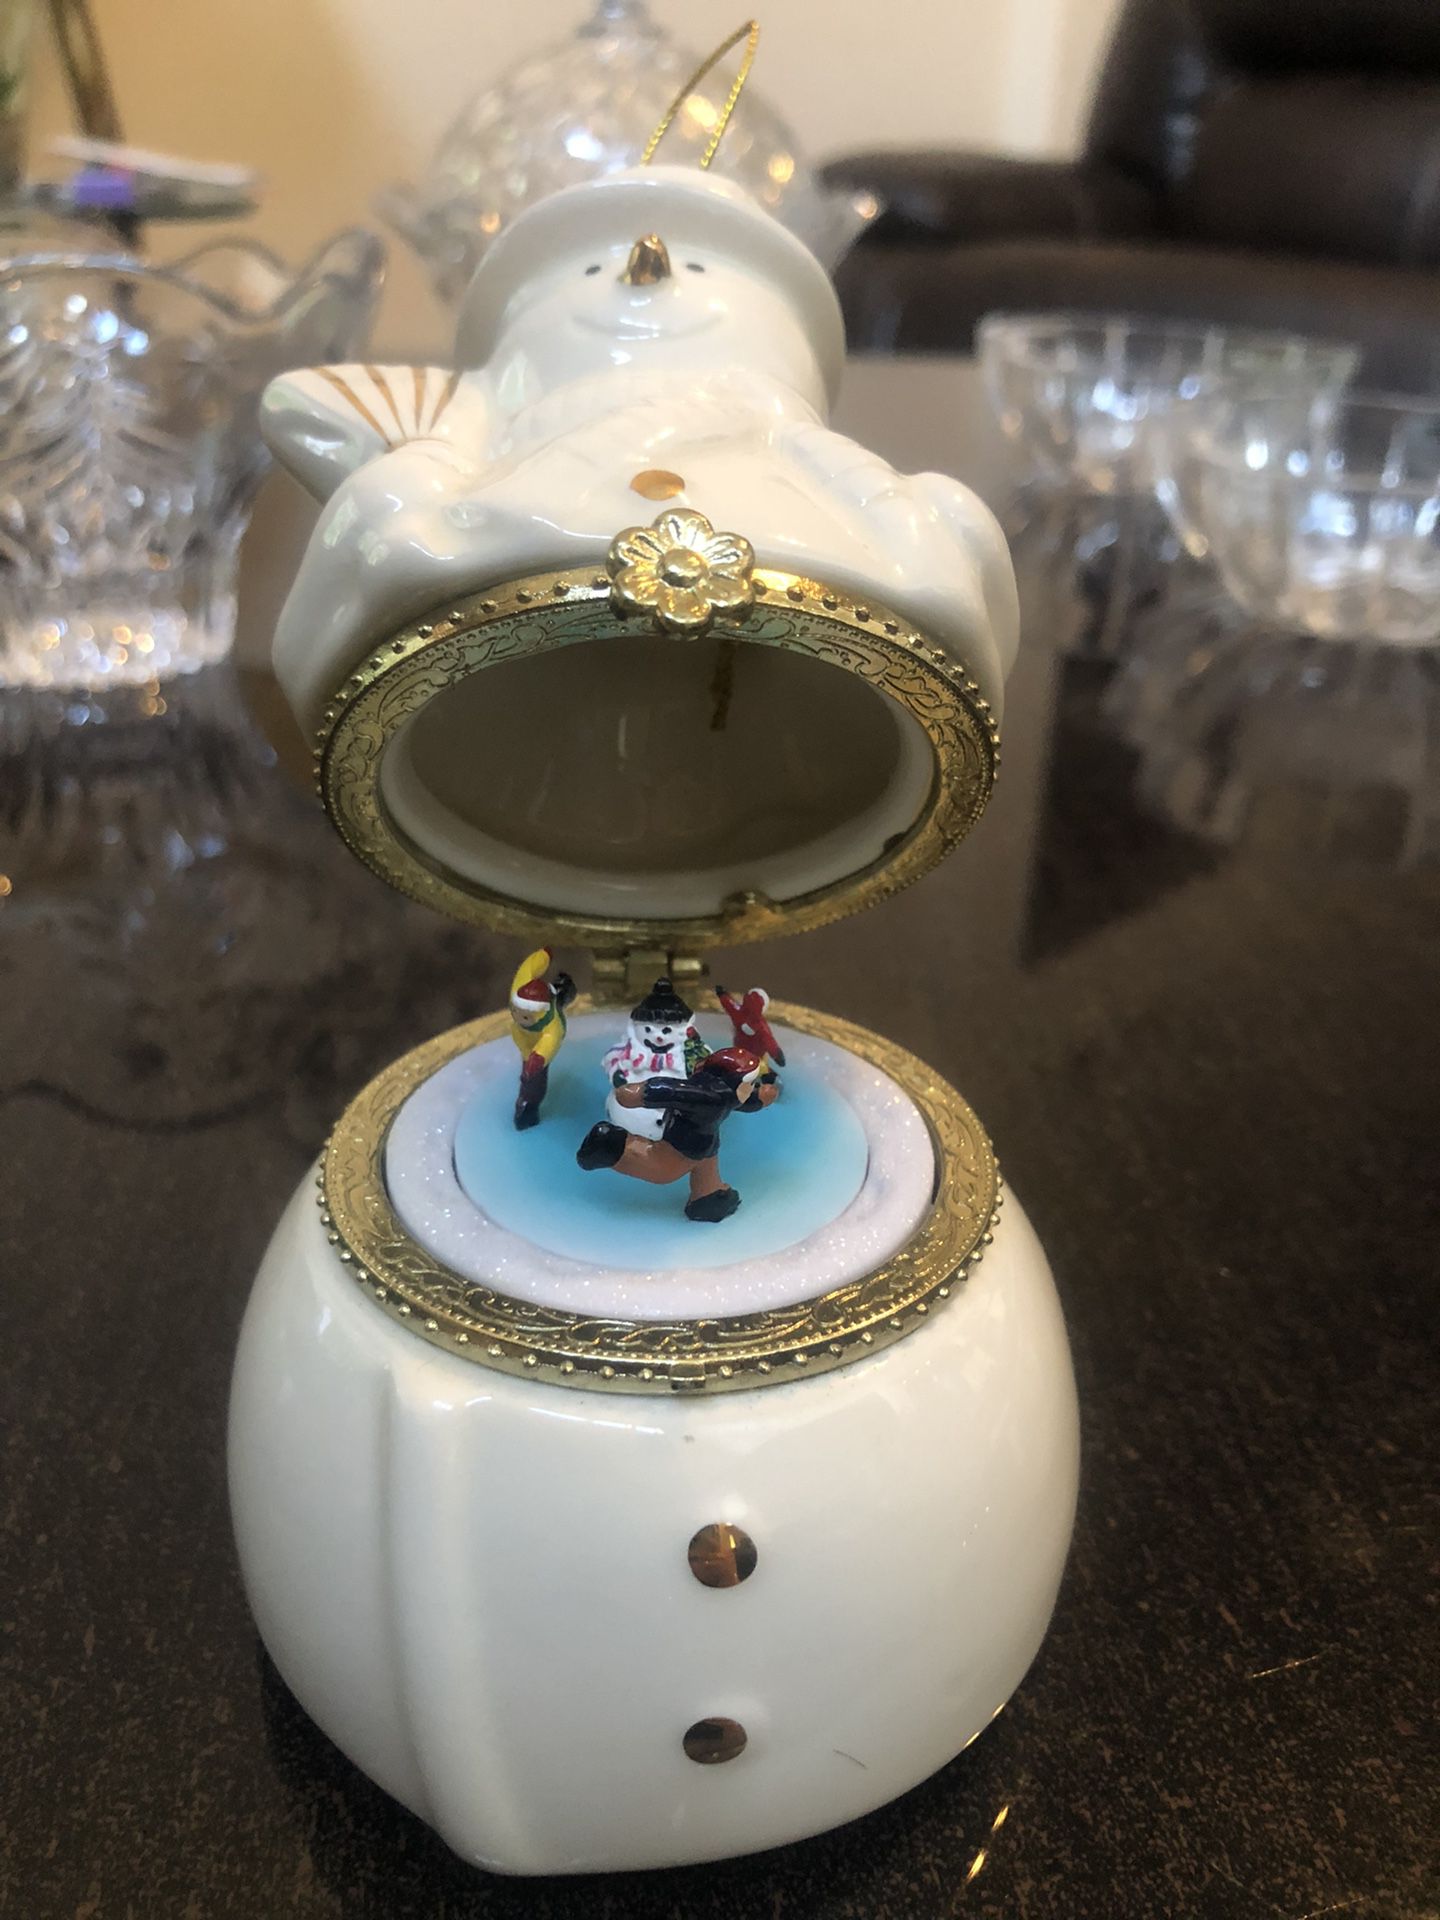   Mr Christmas Porcelain Snowman Hinged Music Box Wind Up Animated Ornament